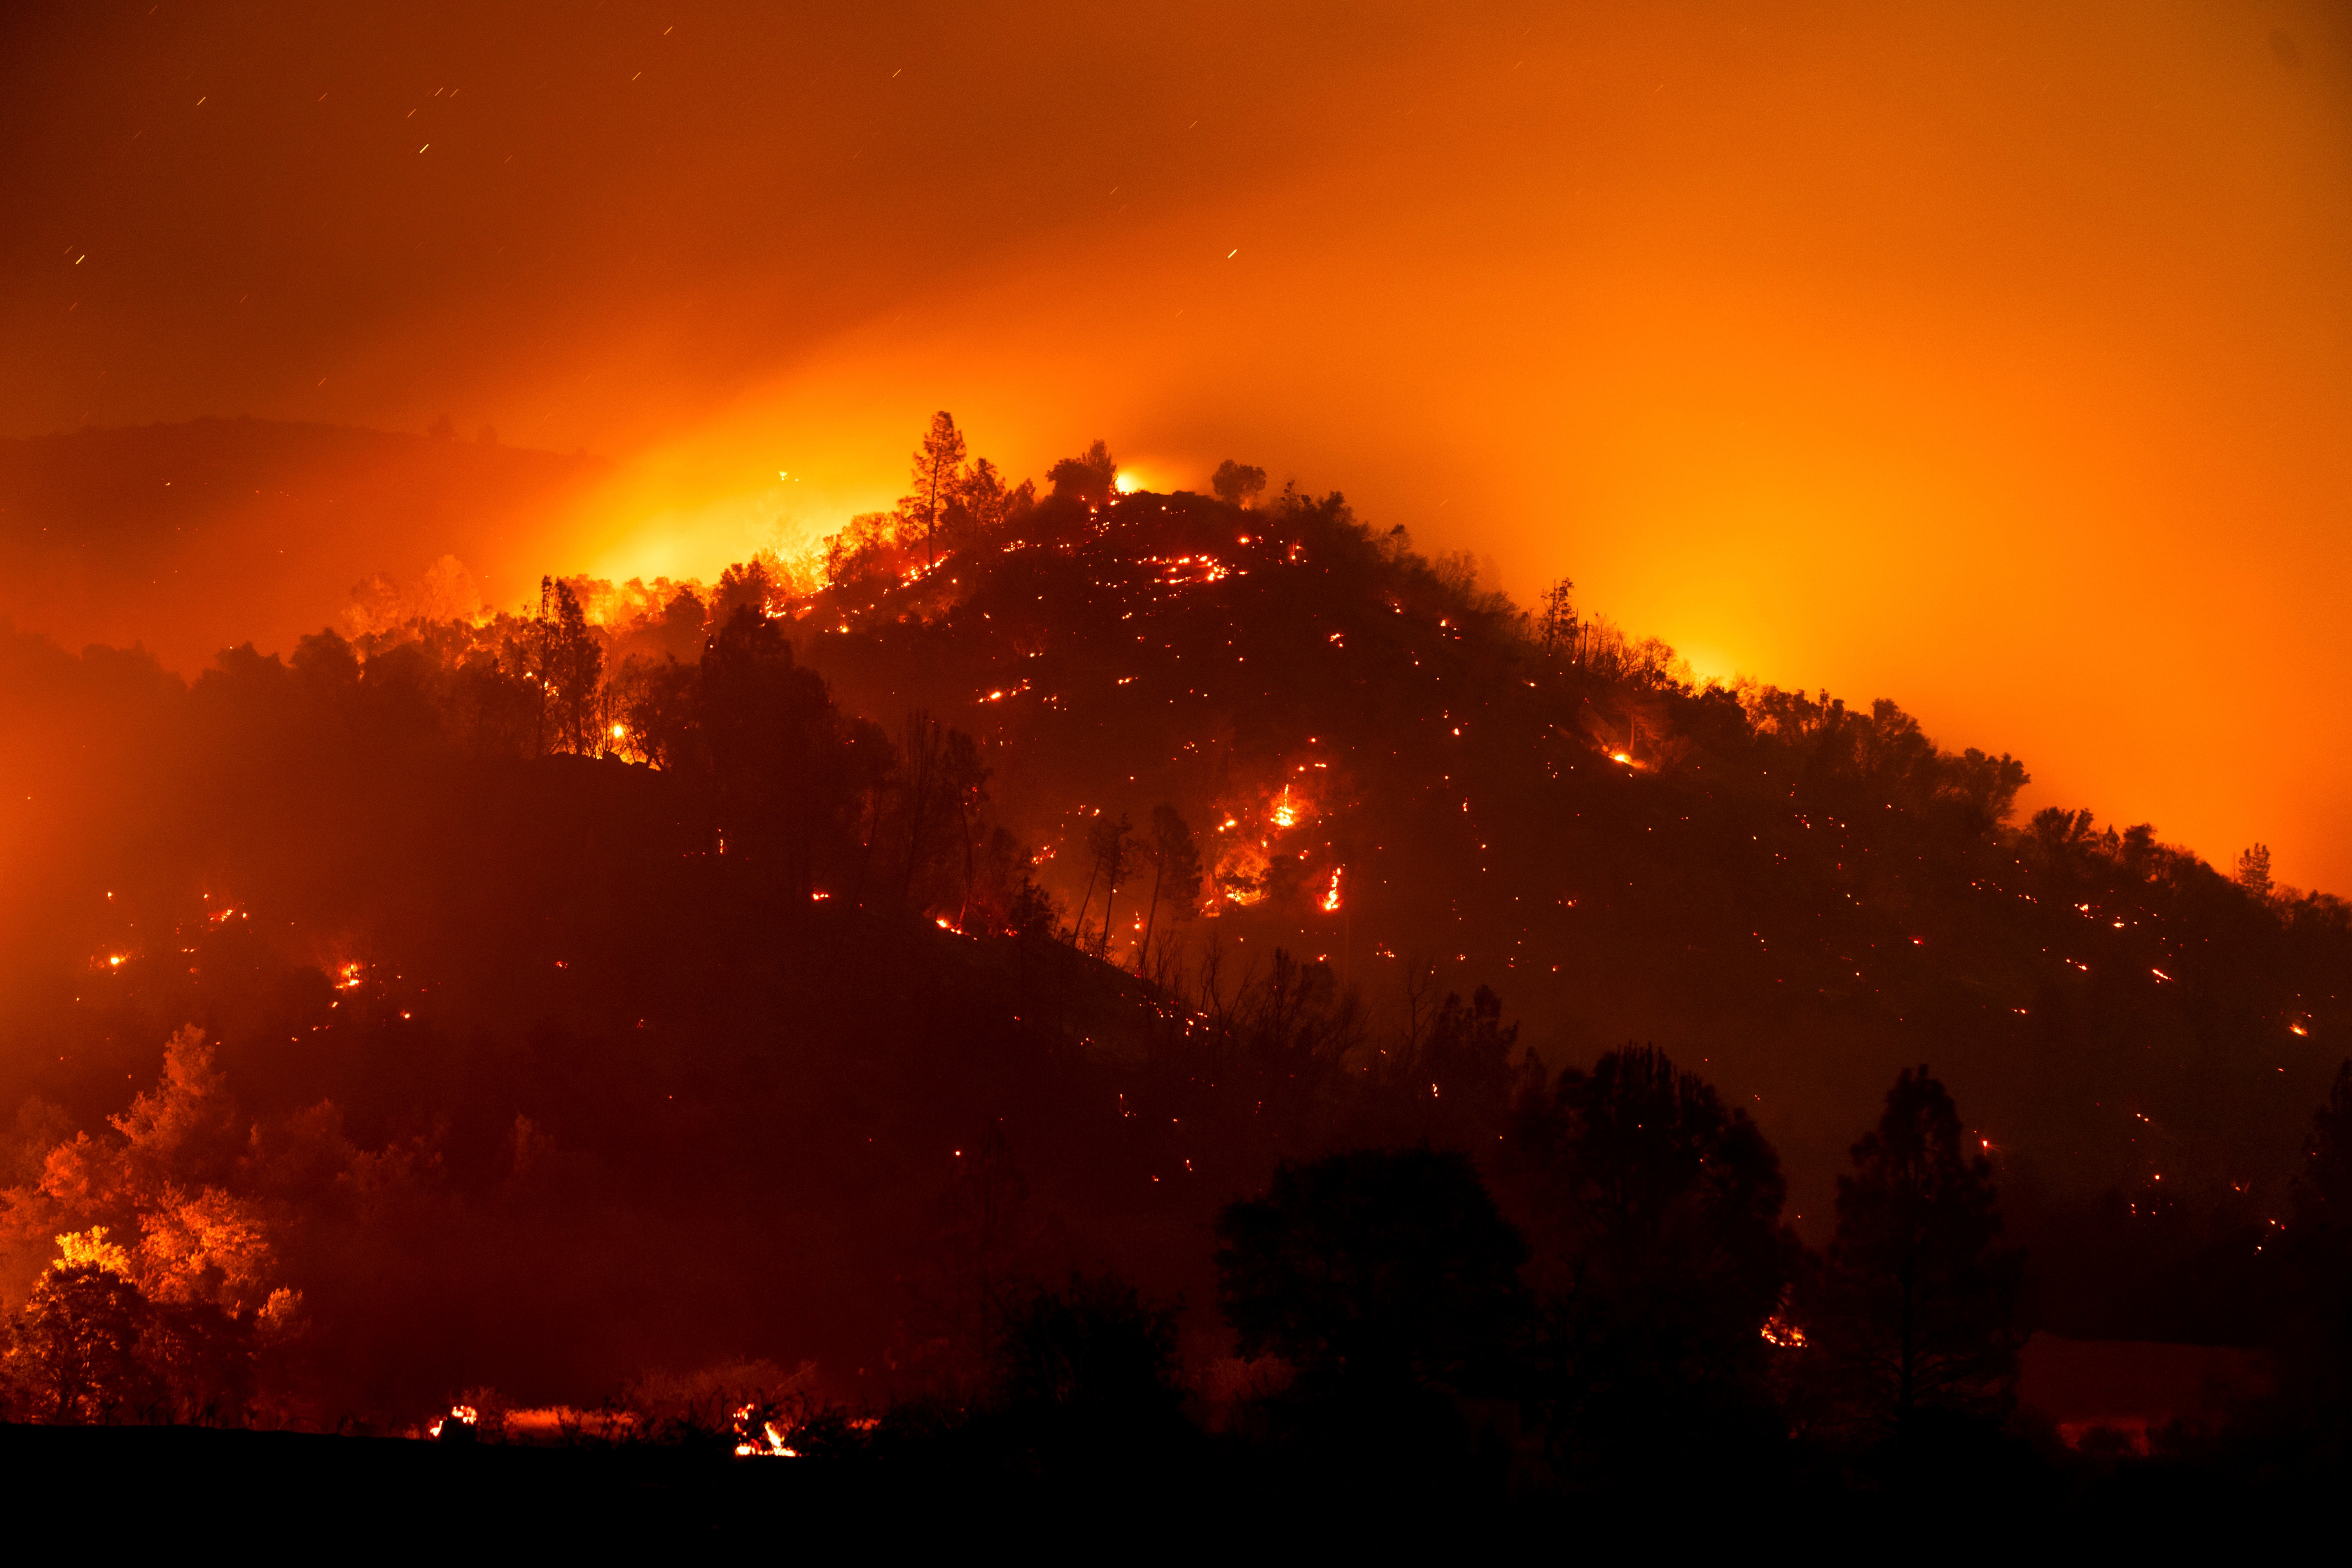 The French Fire in Mariposa County, California is burning near Yosemite National Park, prompting evacuations in the region